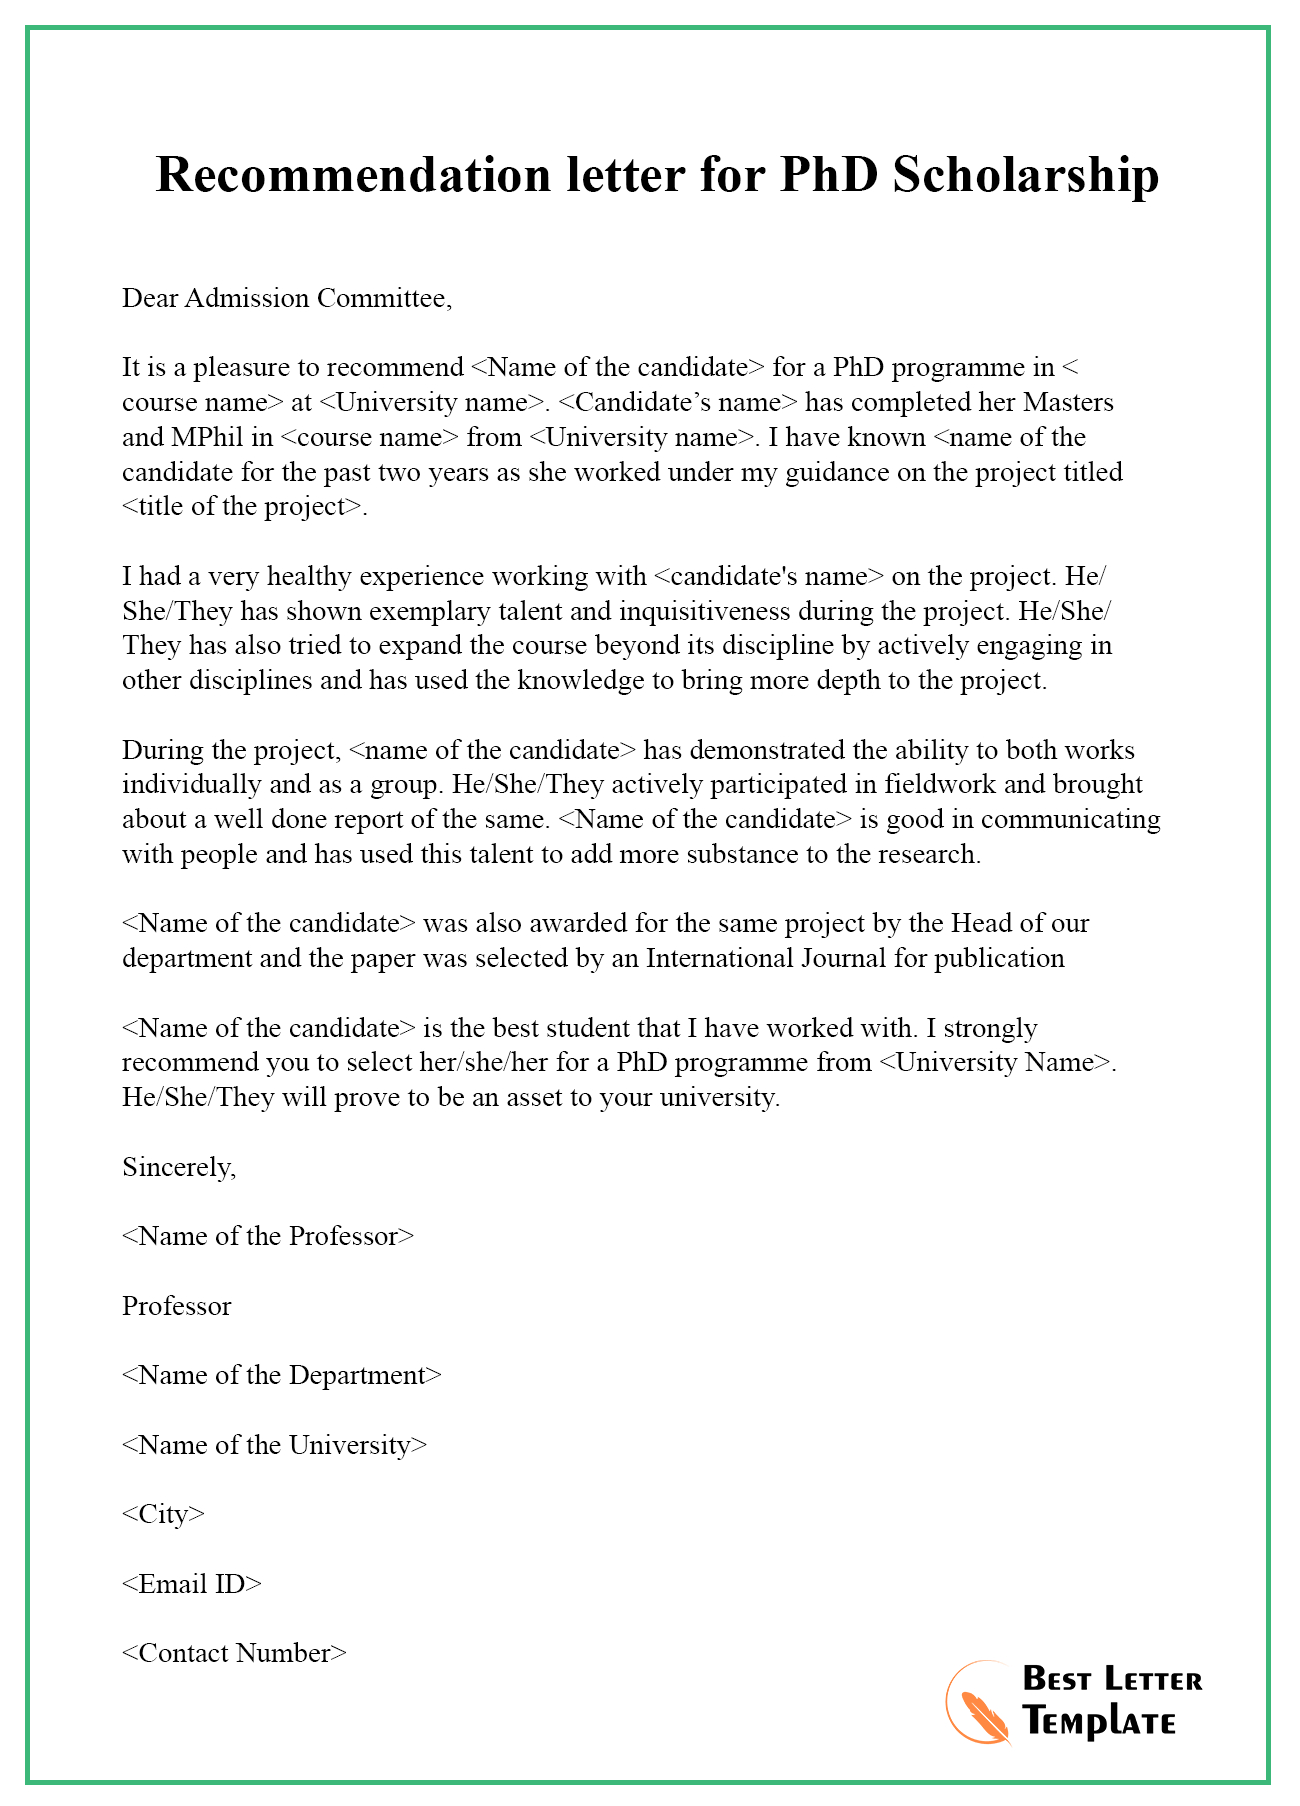 Recommendation Letter For Phd Scholarship Best Letter Template intended for dimensions 1300 X 1806